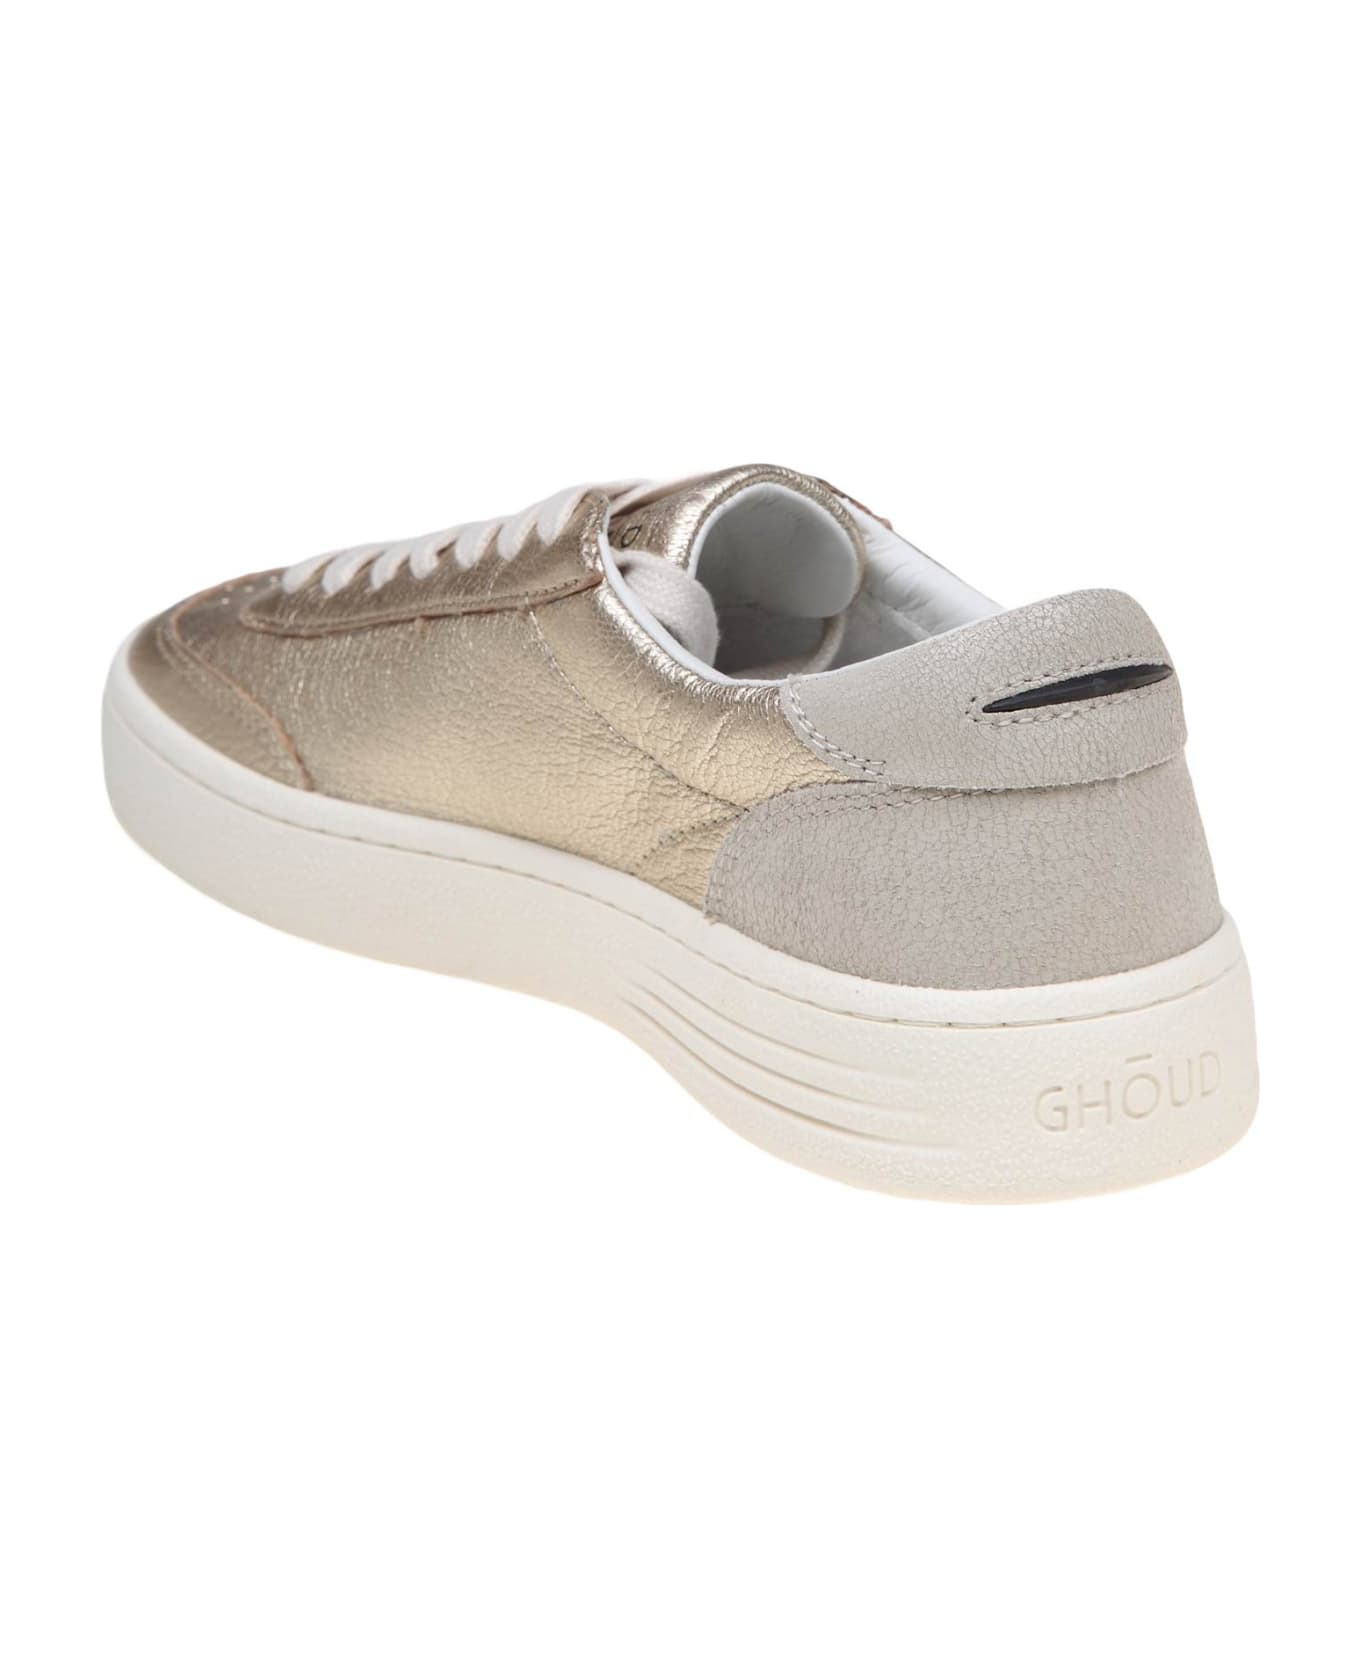 GHOUD Lido Low Sneakers In Platinum Color Leather - GOLD